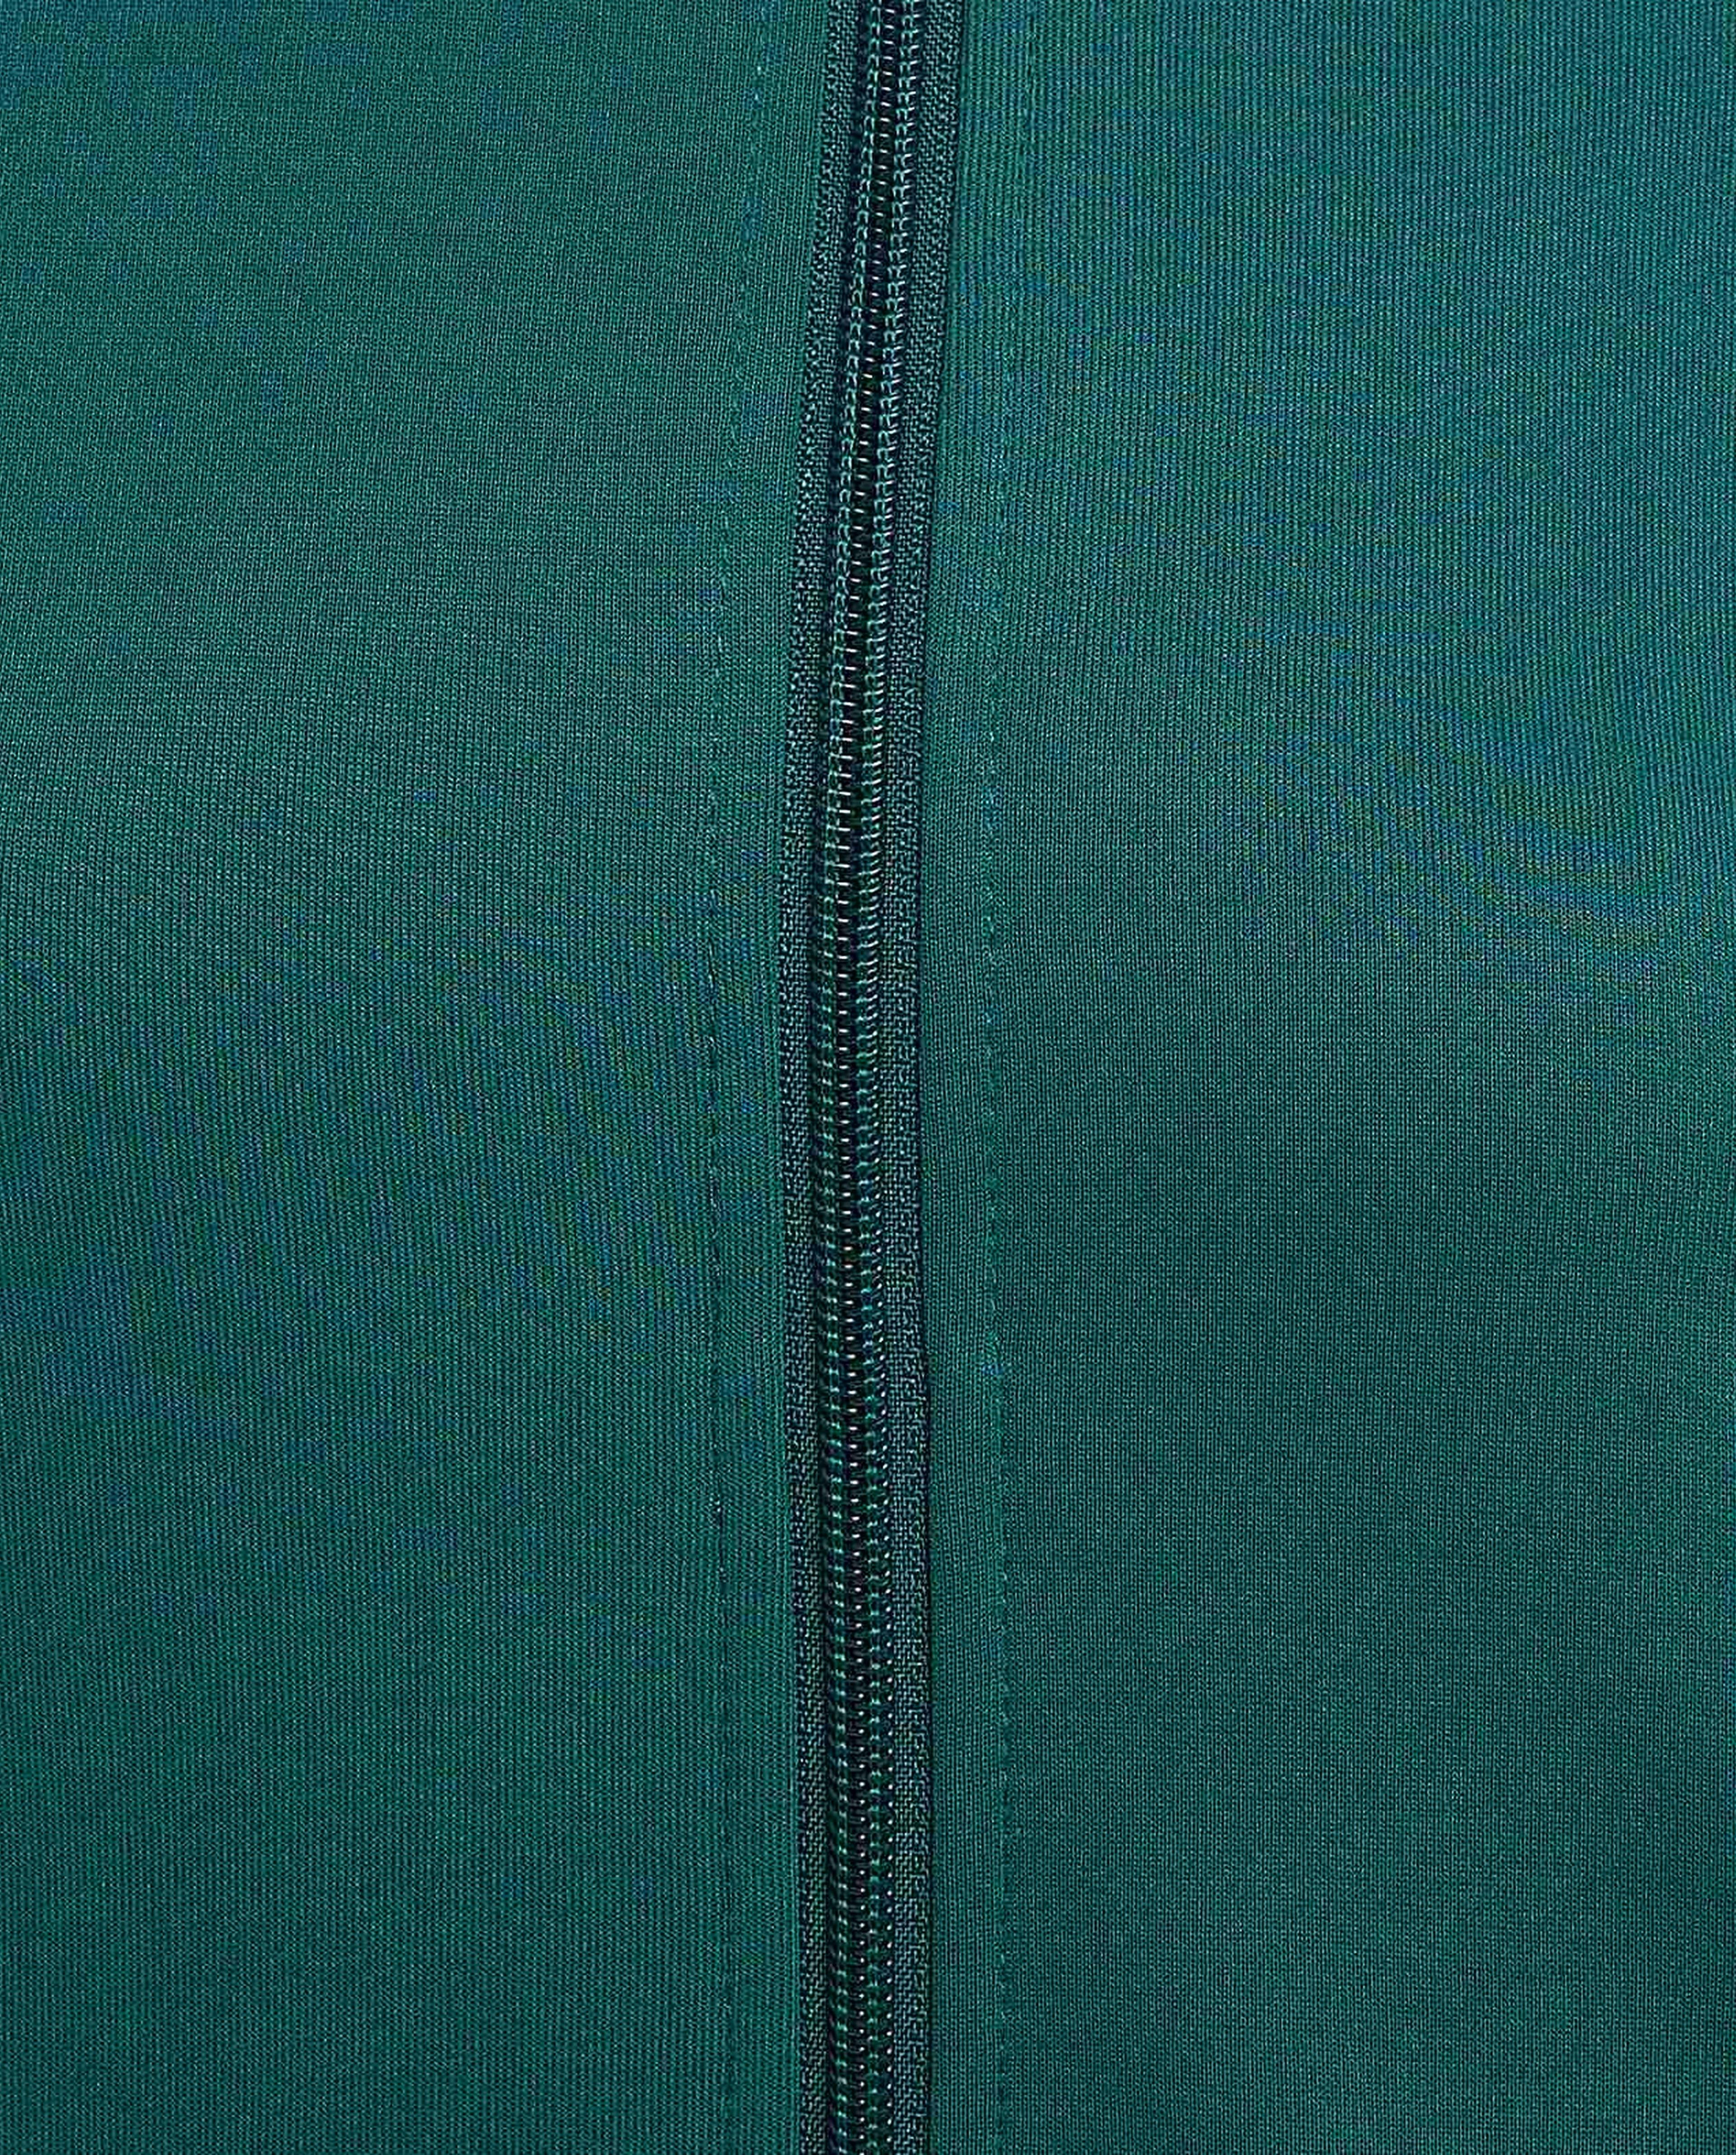 Side Stripes Track Jacket with Zipper Closure